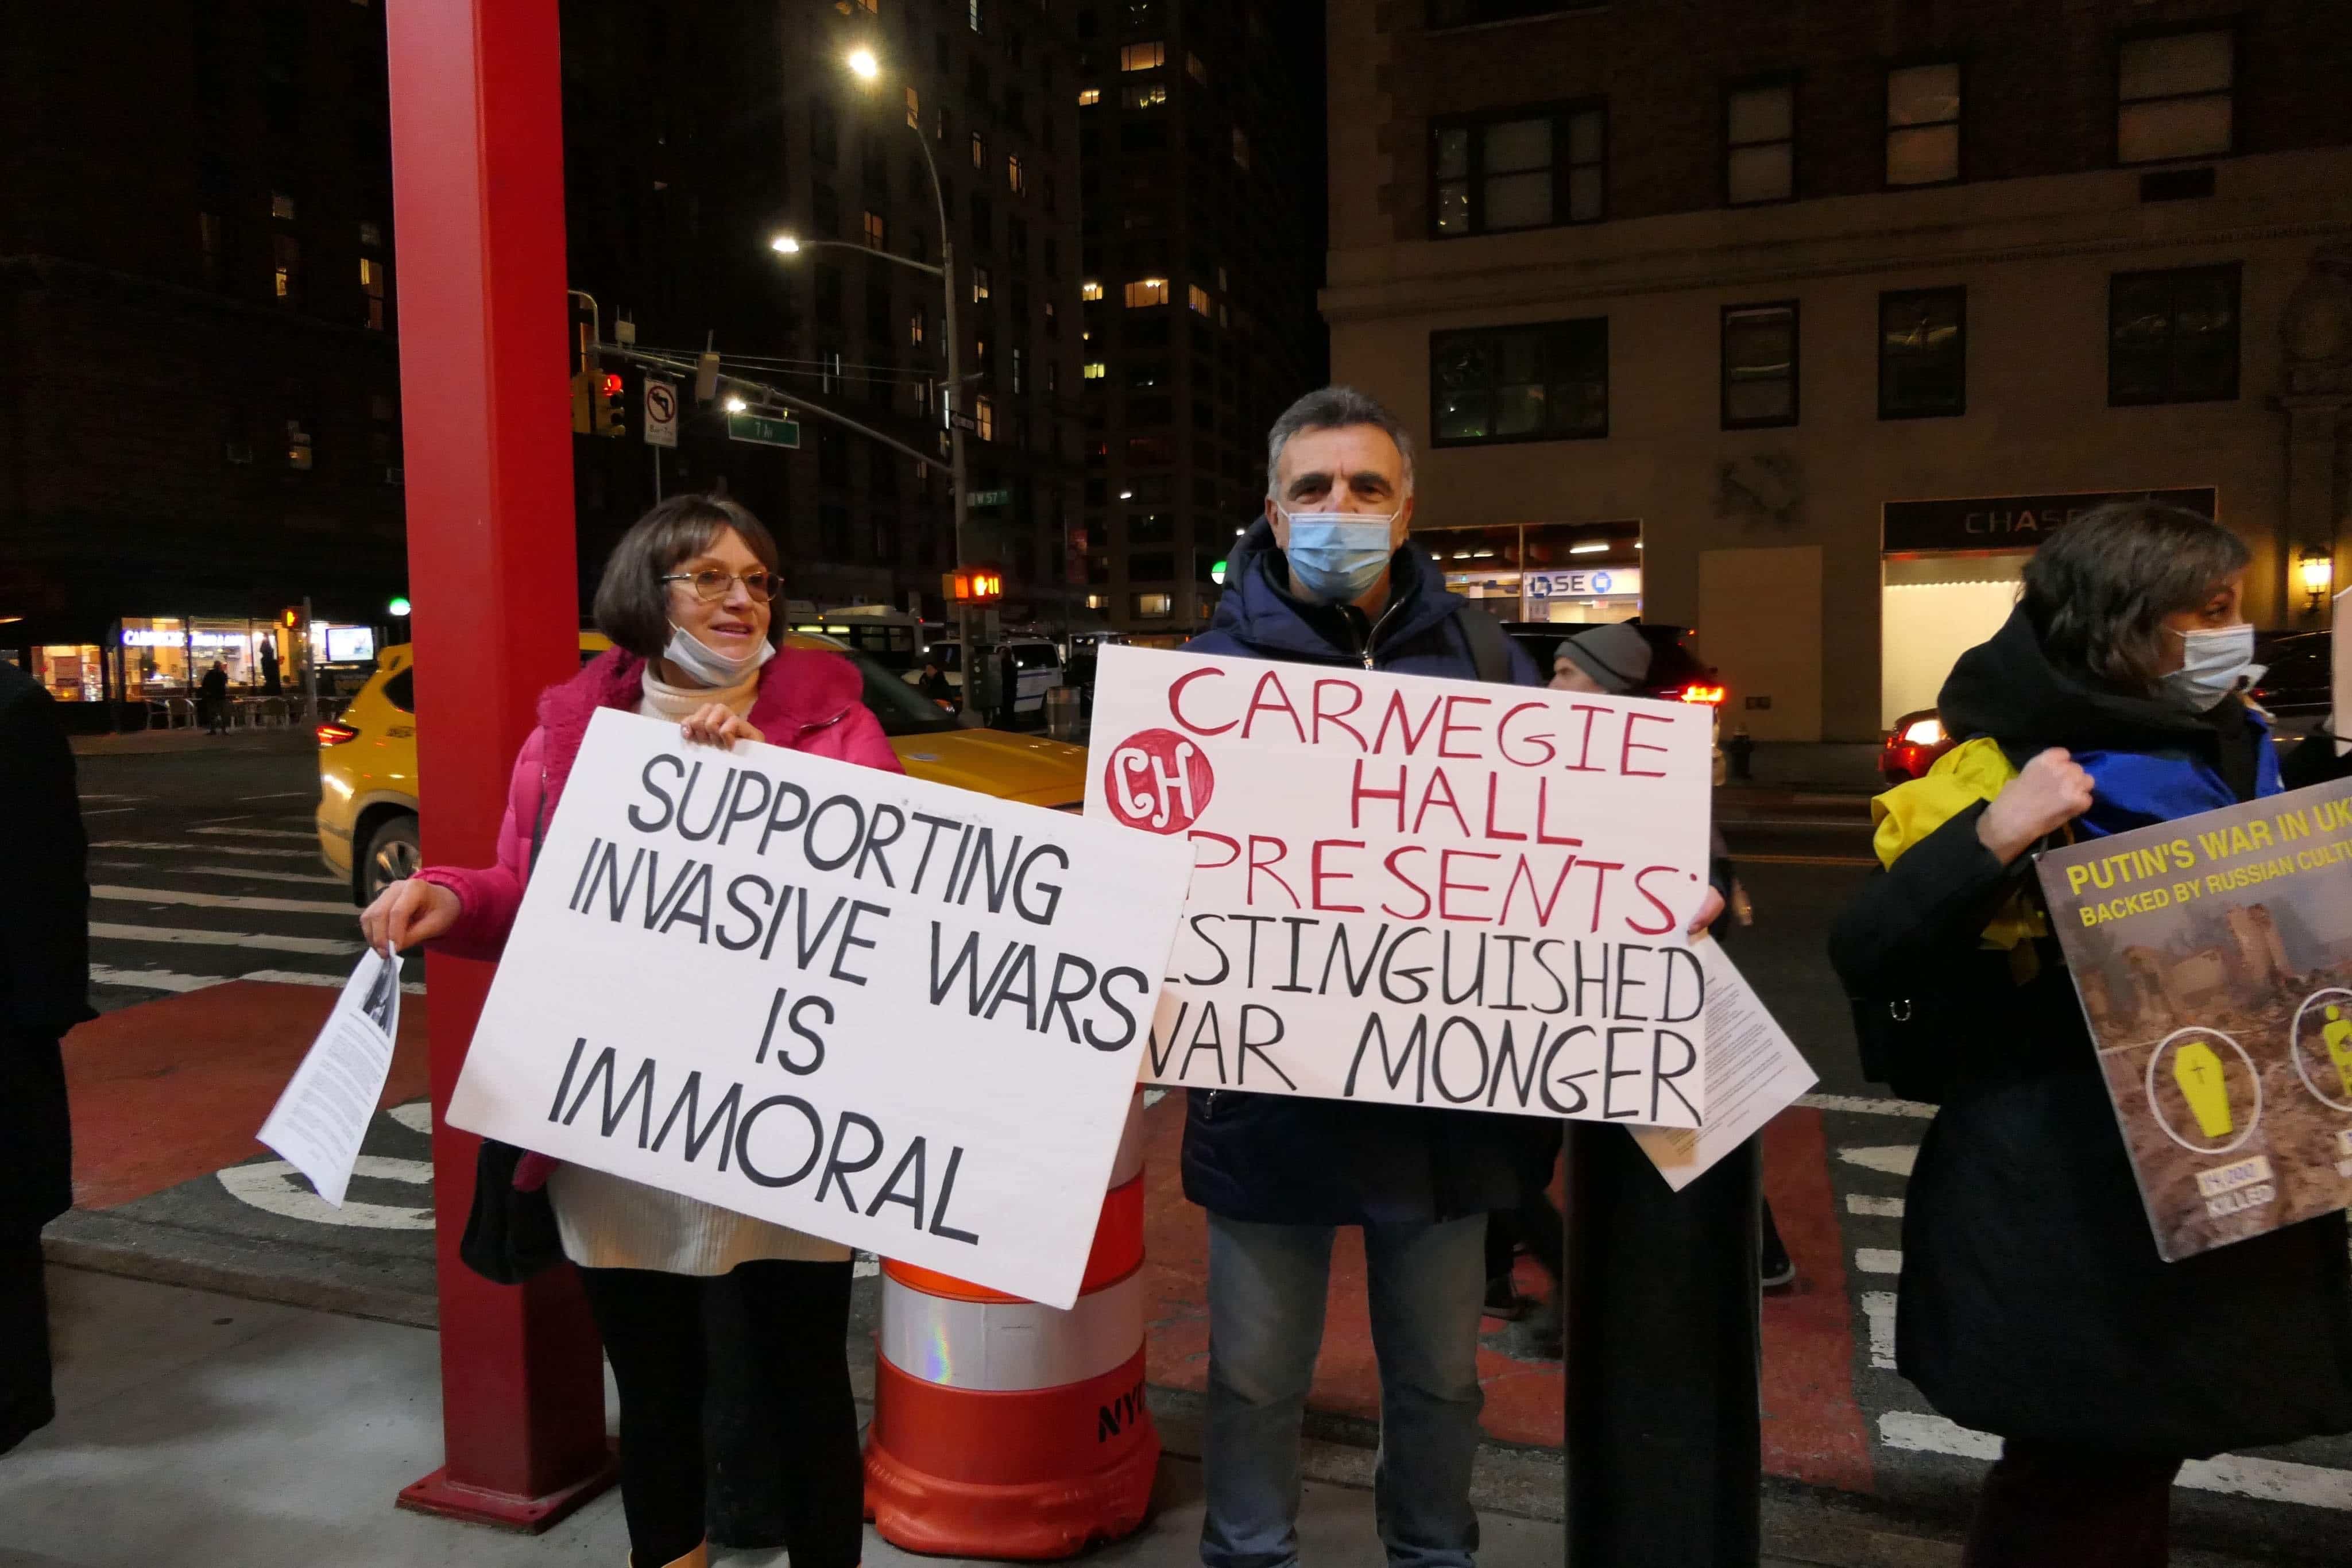 Putin’s pianist is picketed at Carnegie Hall